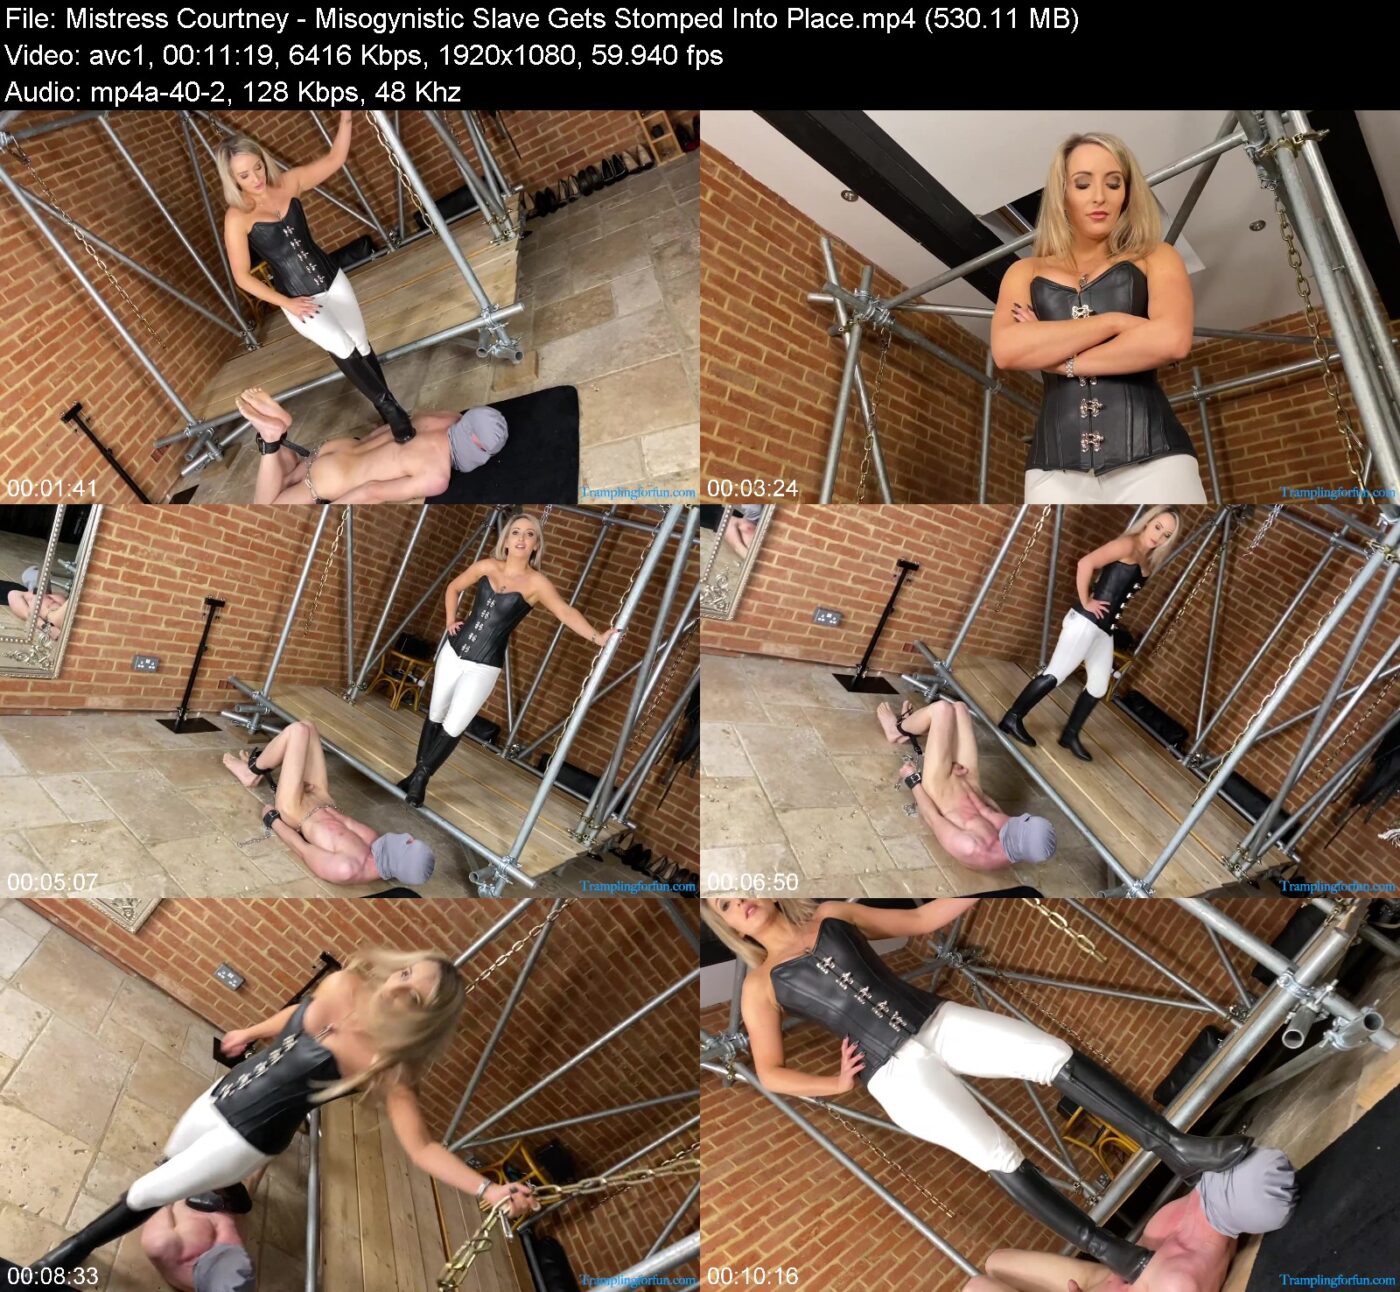 Mistress Courtney - Misogynistic Slave Gets Stomped Into Place